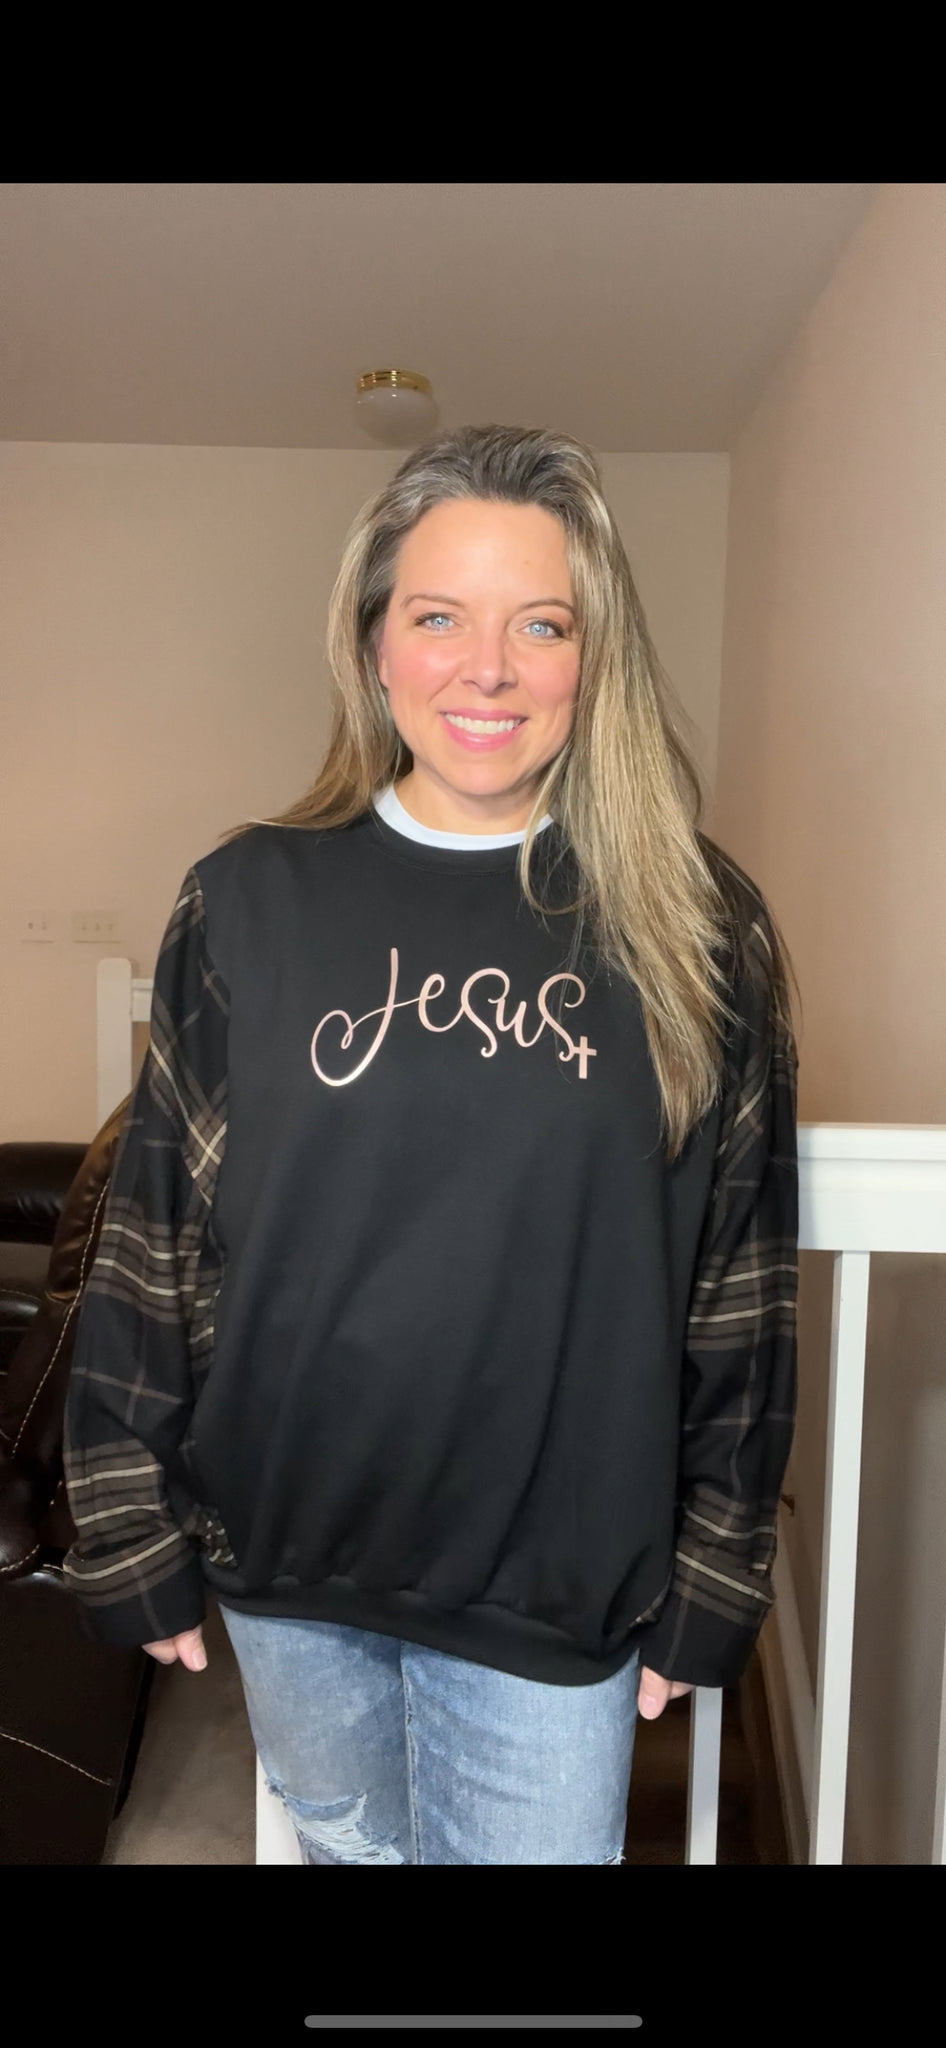 Jesus - woman’s XL/1X - midweight sweatshirt with flannel sleeves ￼